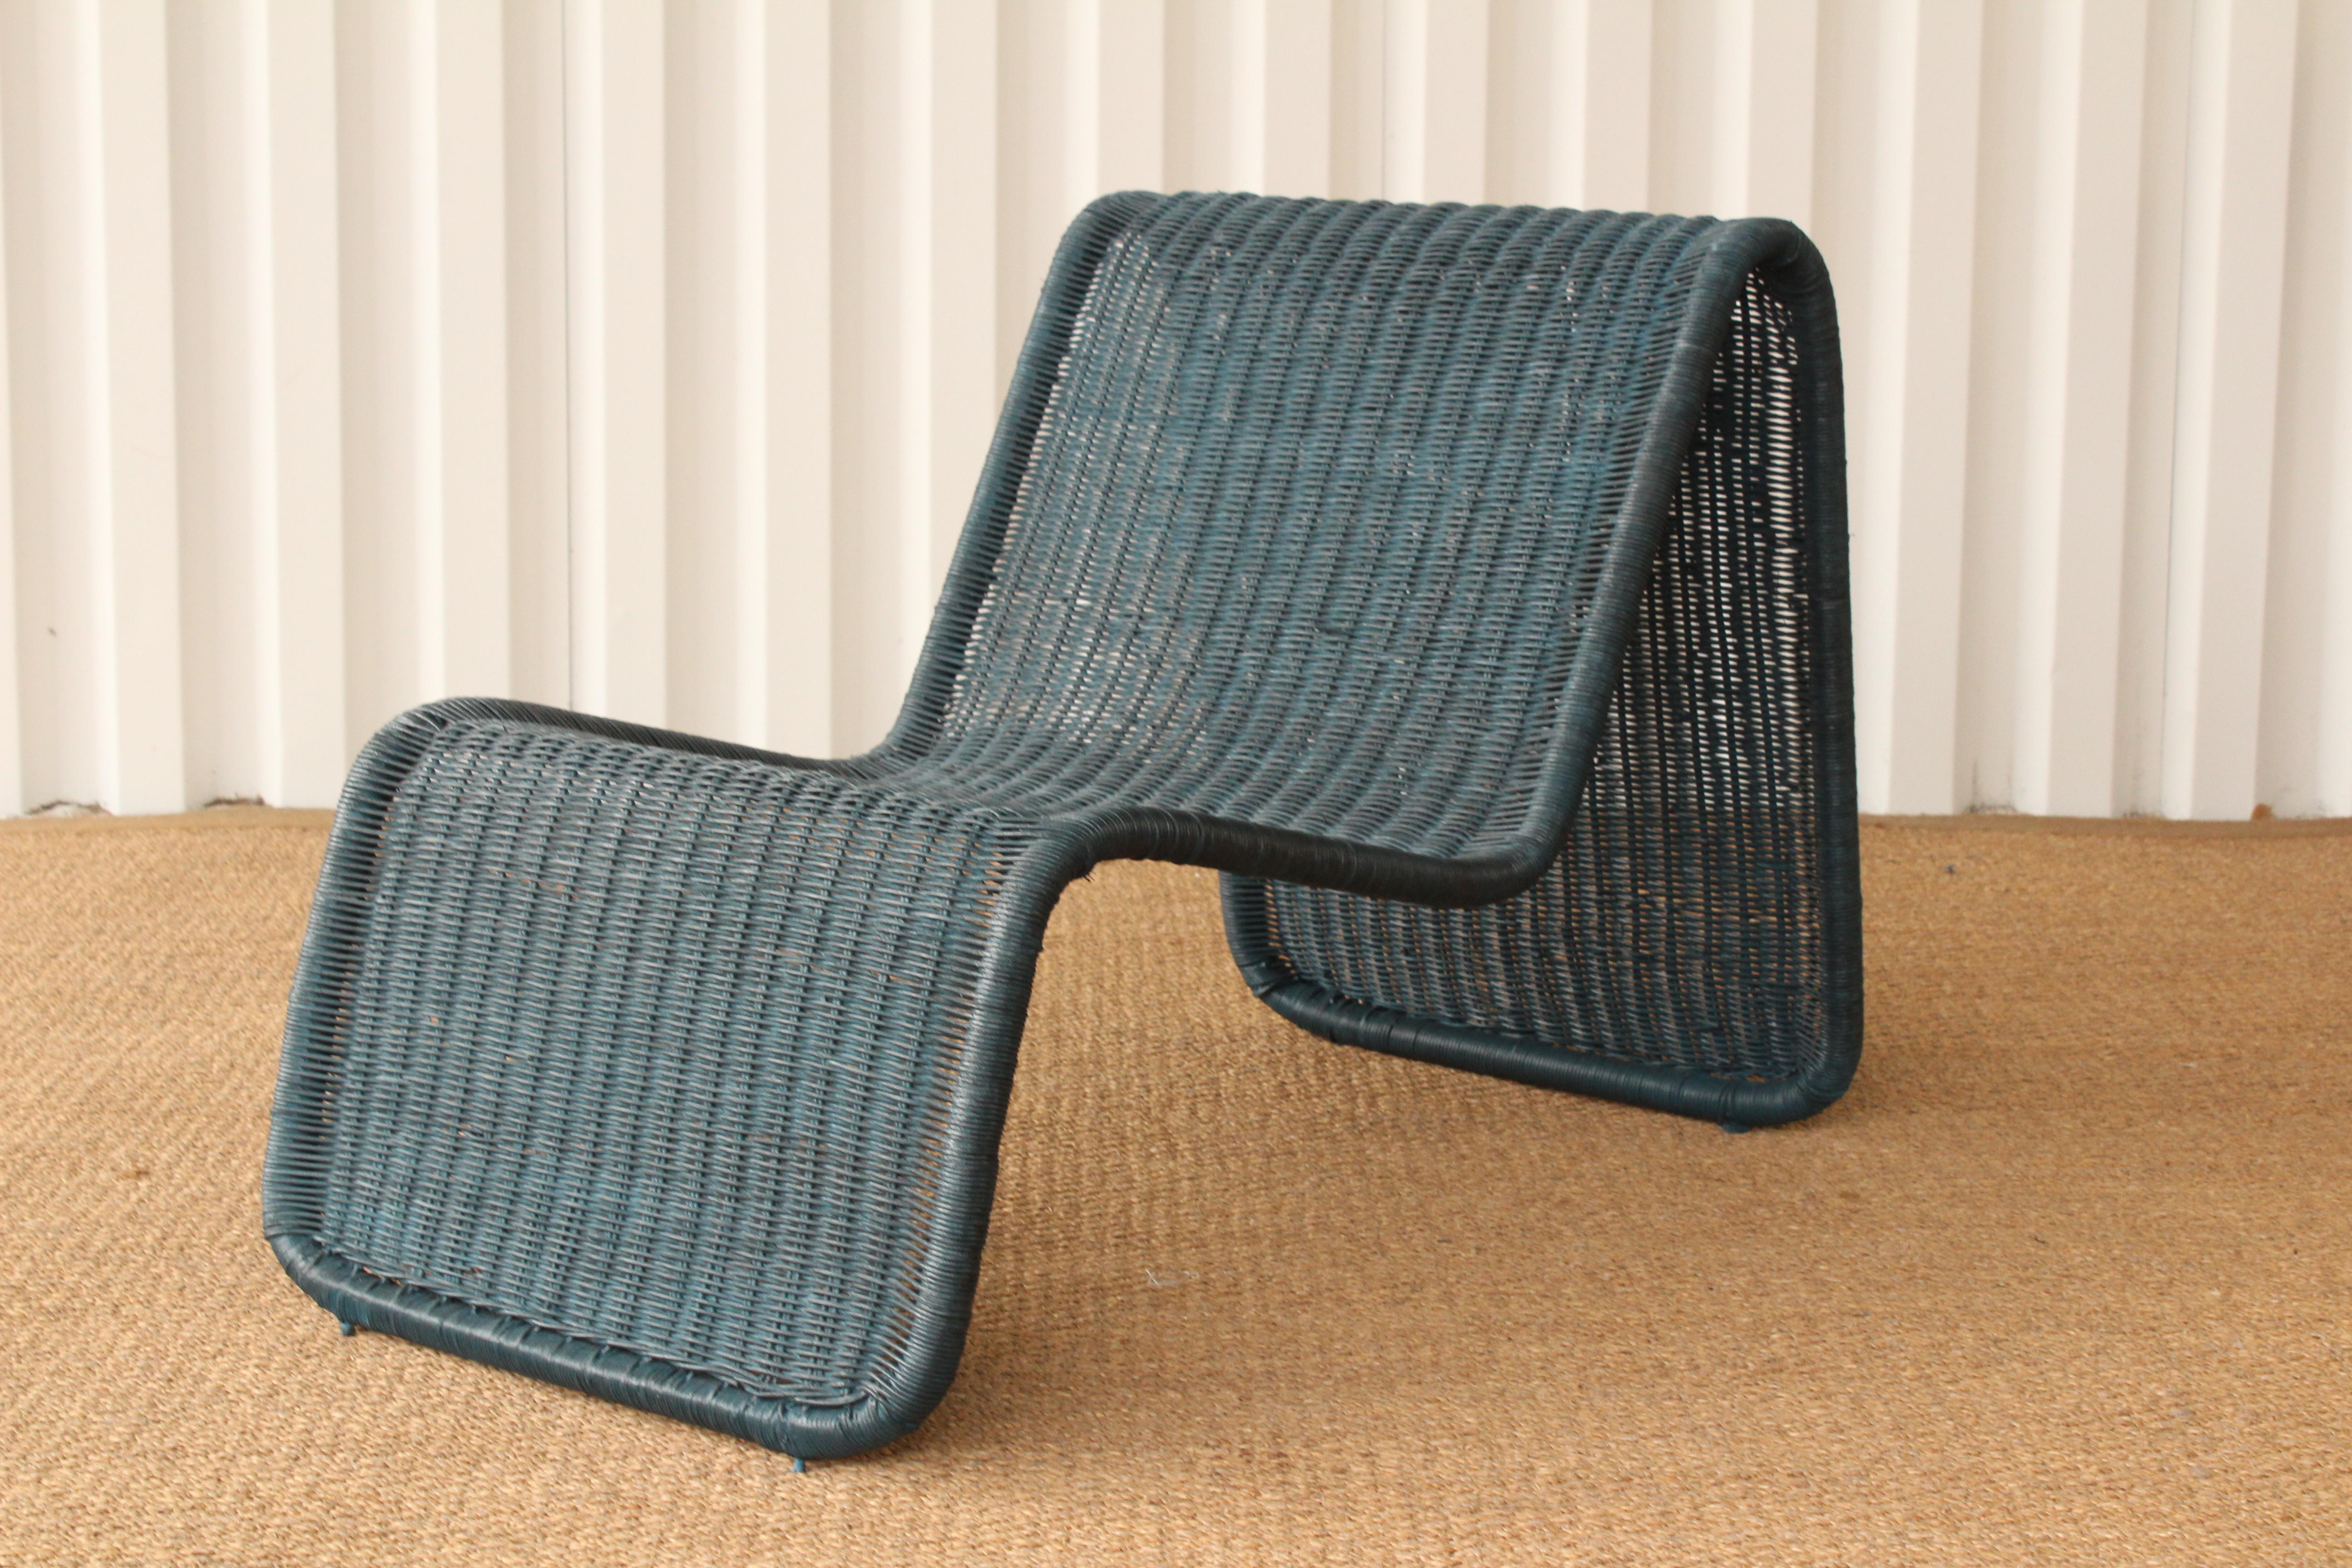 P3 wicker lounge chair in blue paint by Tito Agnoli, Italy, 1960s. All have been painted blue. Pair available, sold individually.